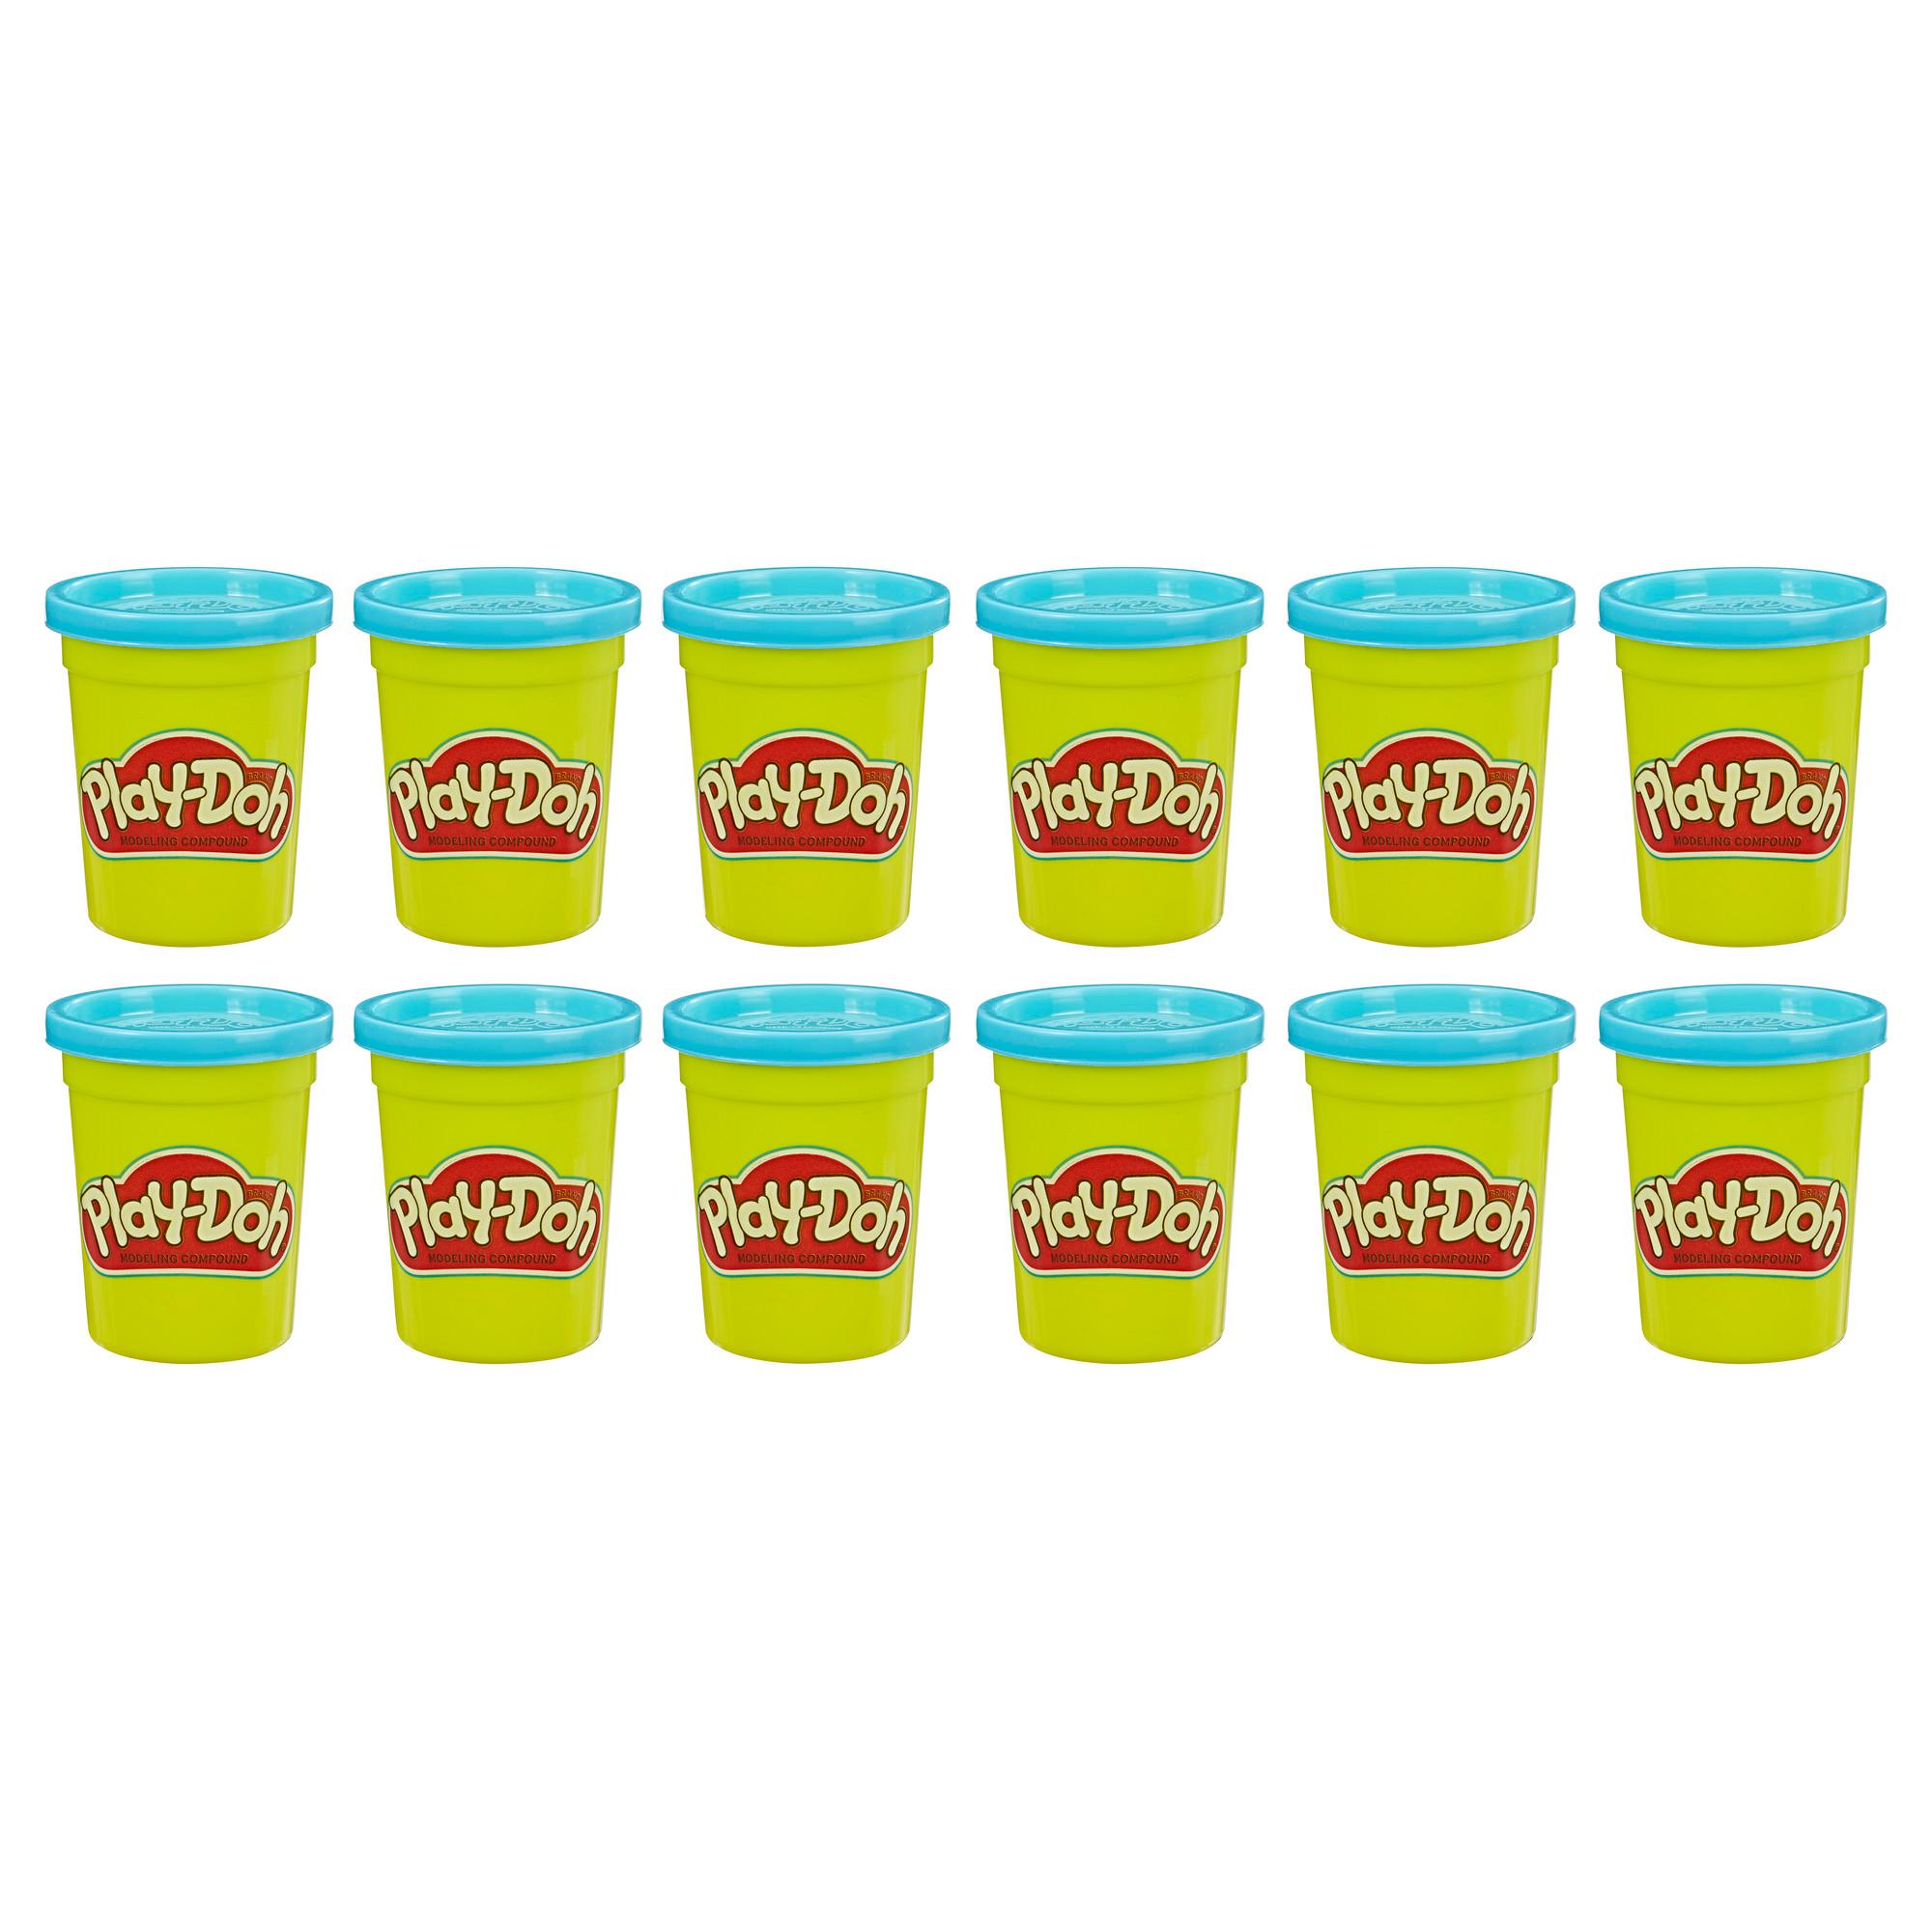 Play-Doh Hasb5517bamz 4-Pack of Colors Gift Set Bundle (12 Cans-48 oz)